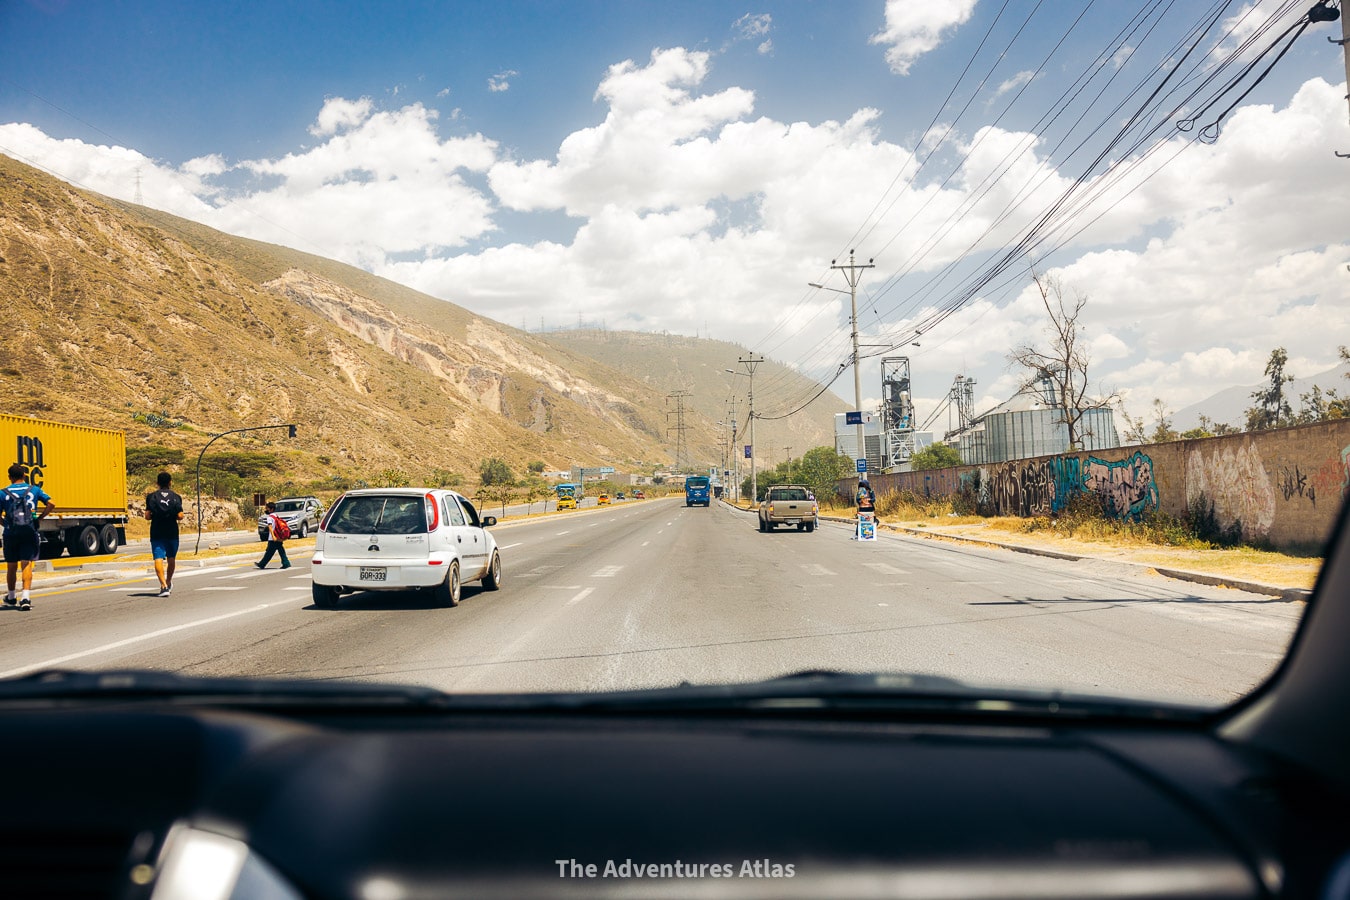 Driving on the highway in Ecuador